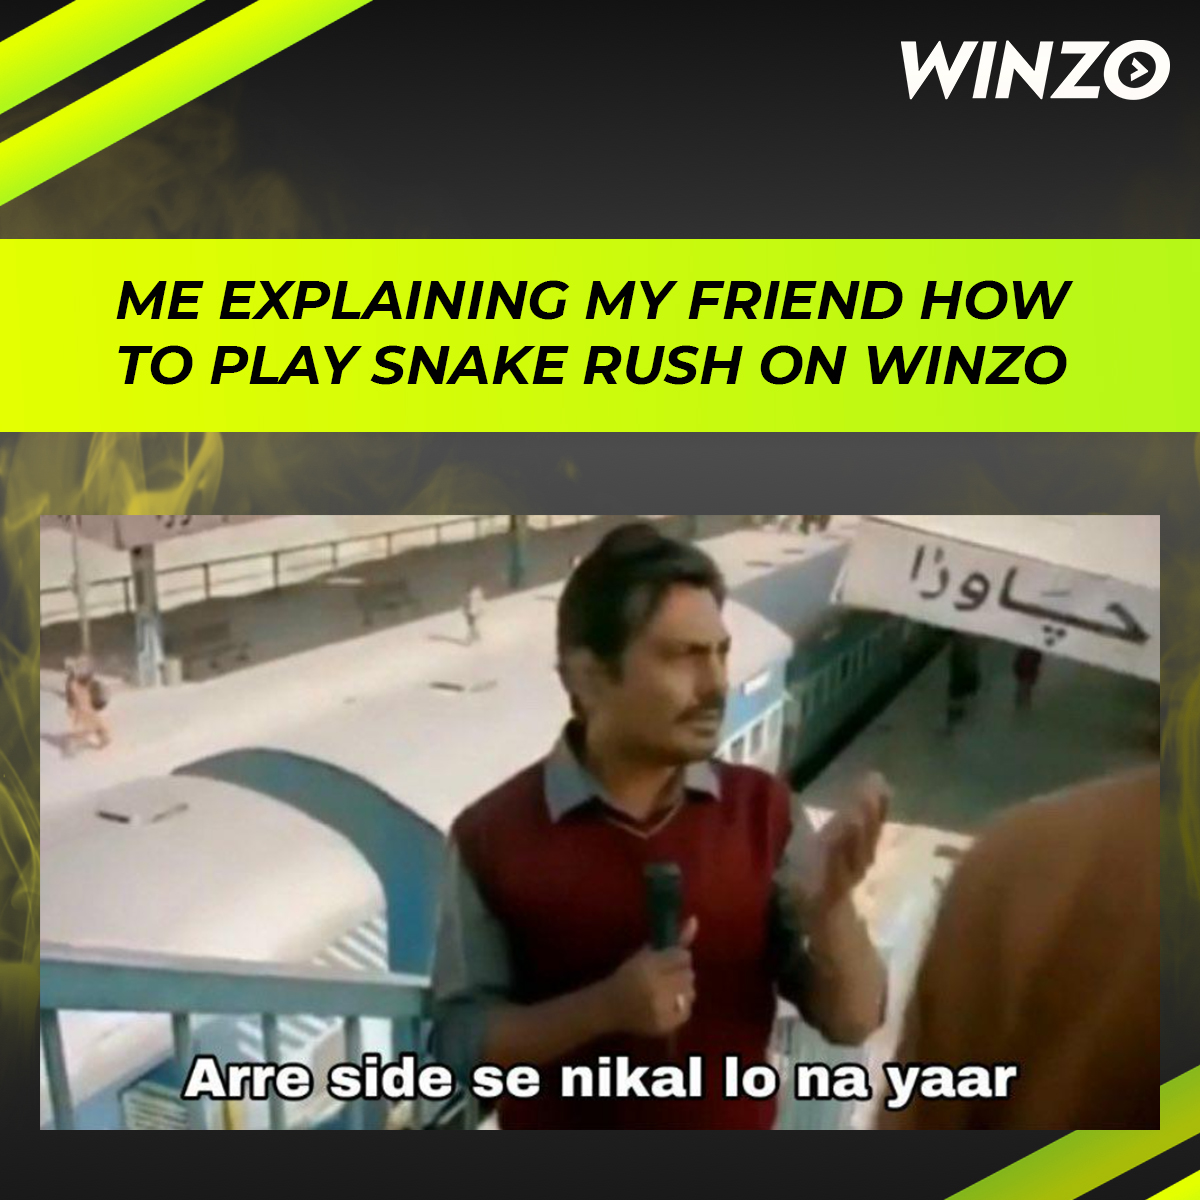 WinZO в Twitter: „Tag your friends and invite them on WinZO now 🎮 #WinZO  #Mobilegaming #Indiangamer #Meme /CFmneYNfzB“ / Twitter